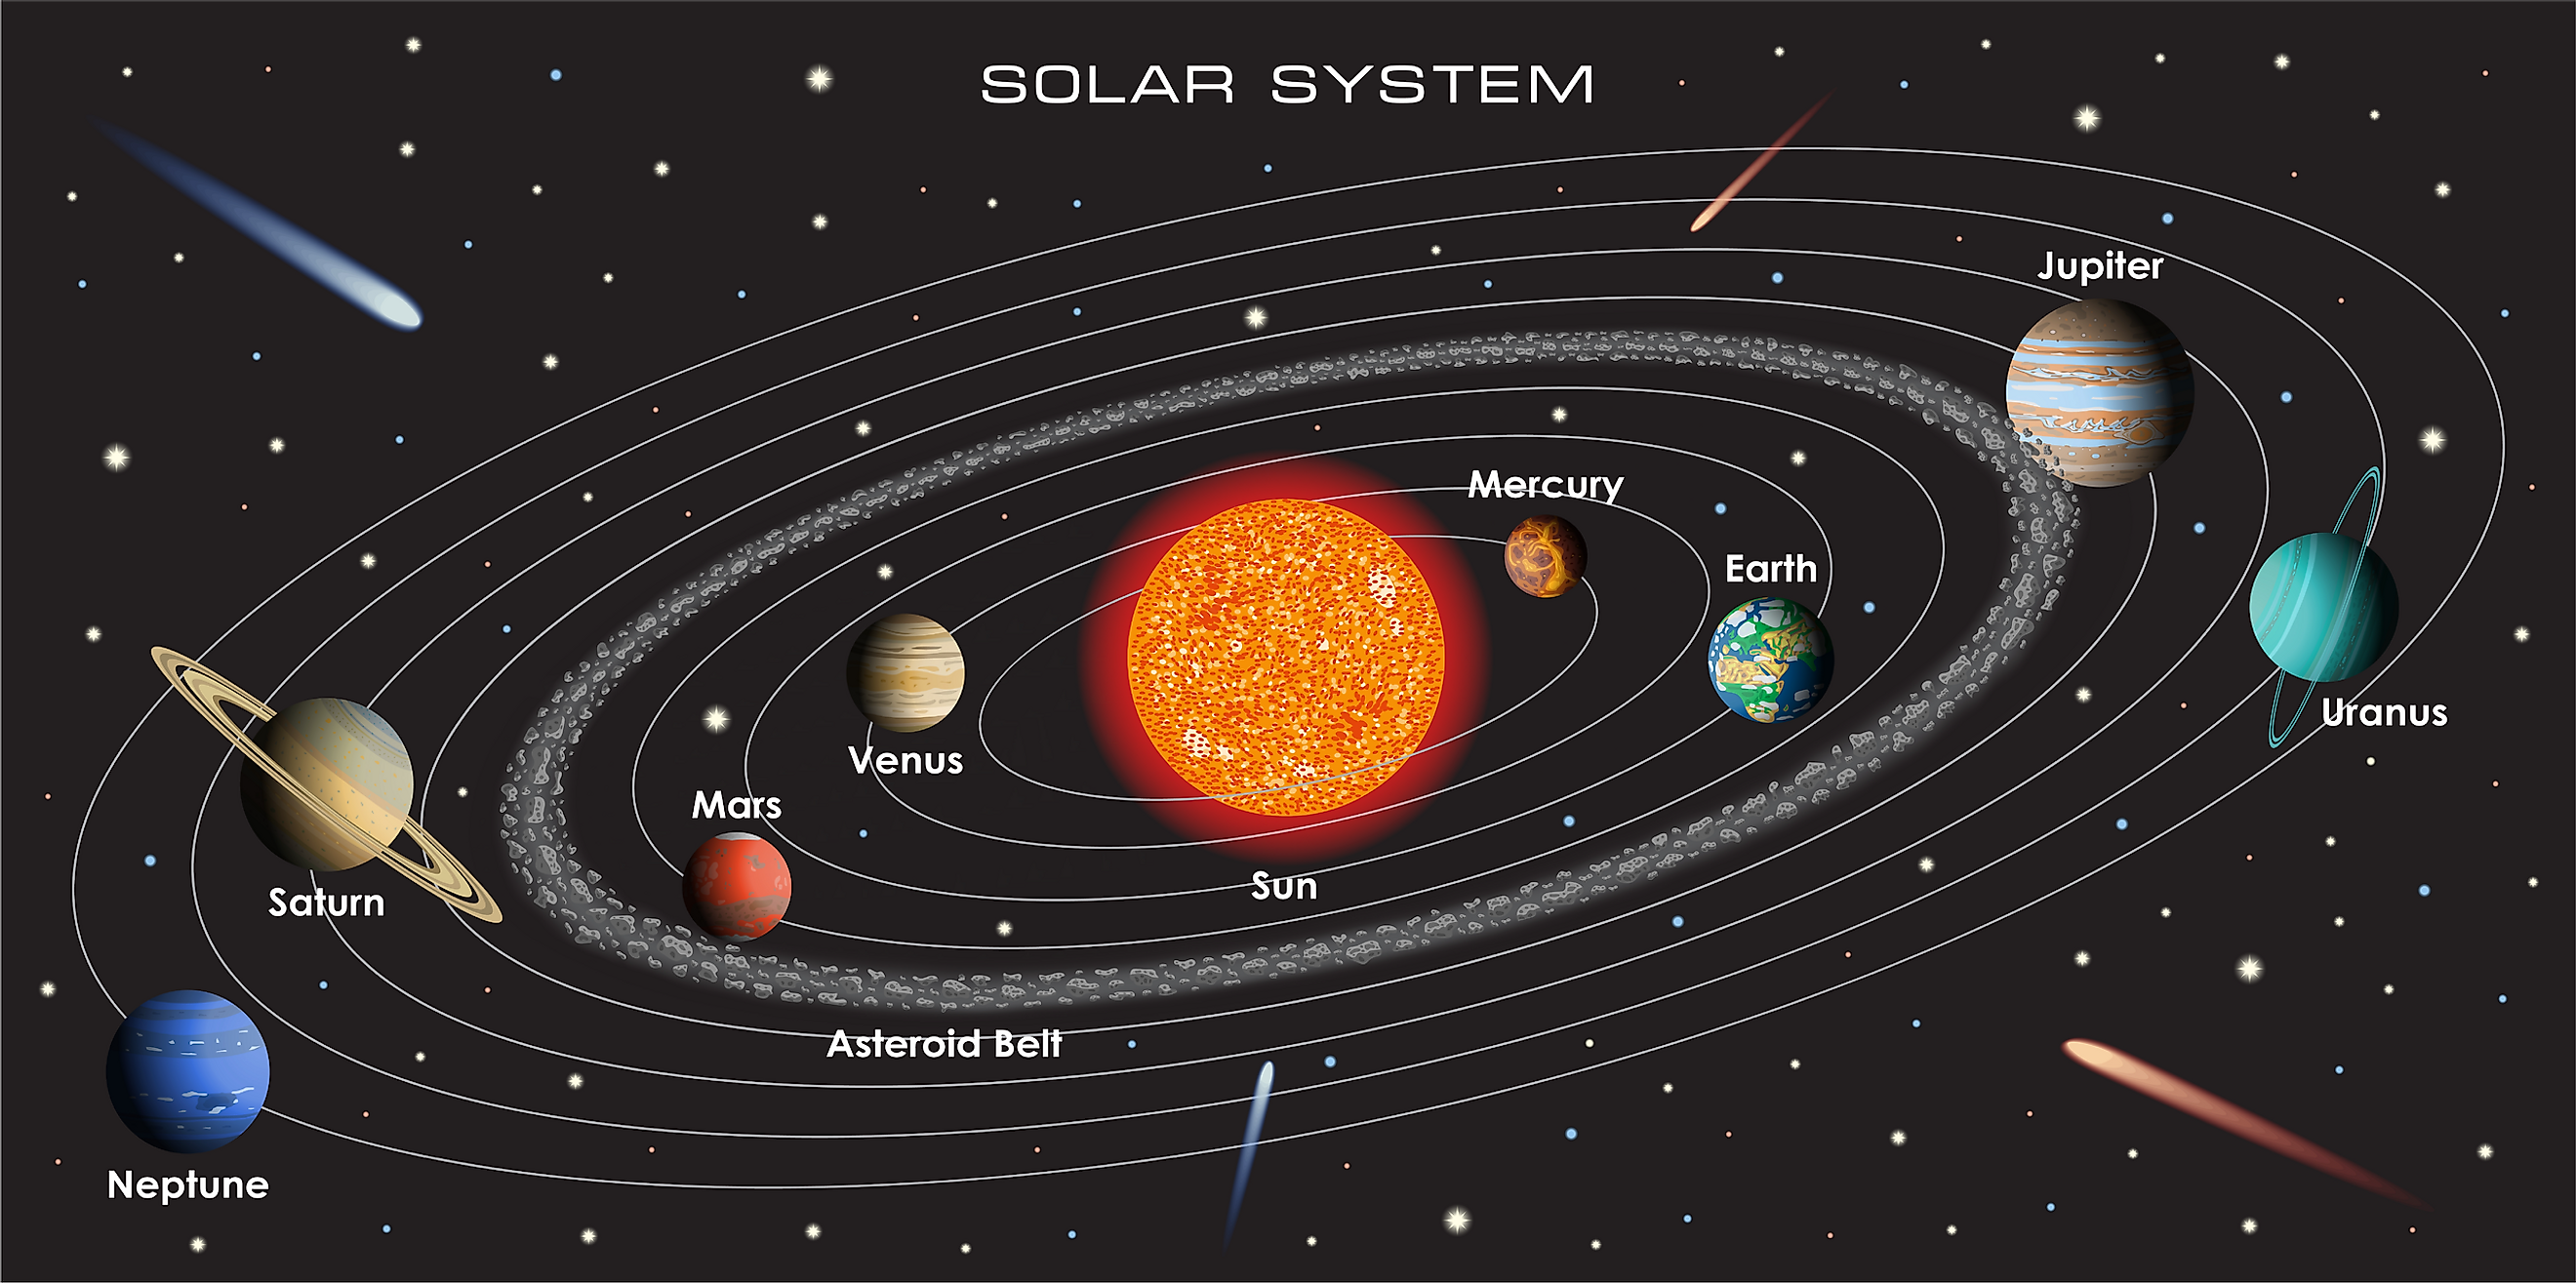 how does the look in the solar system planets